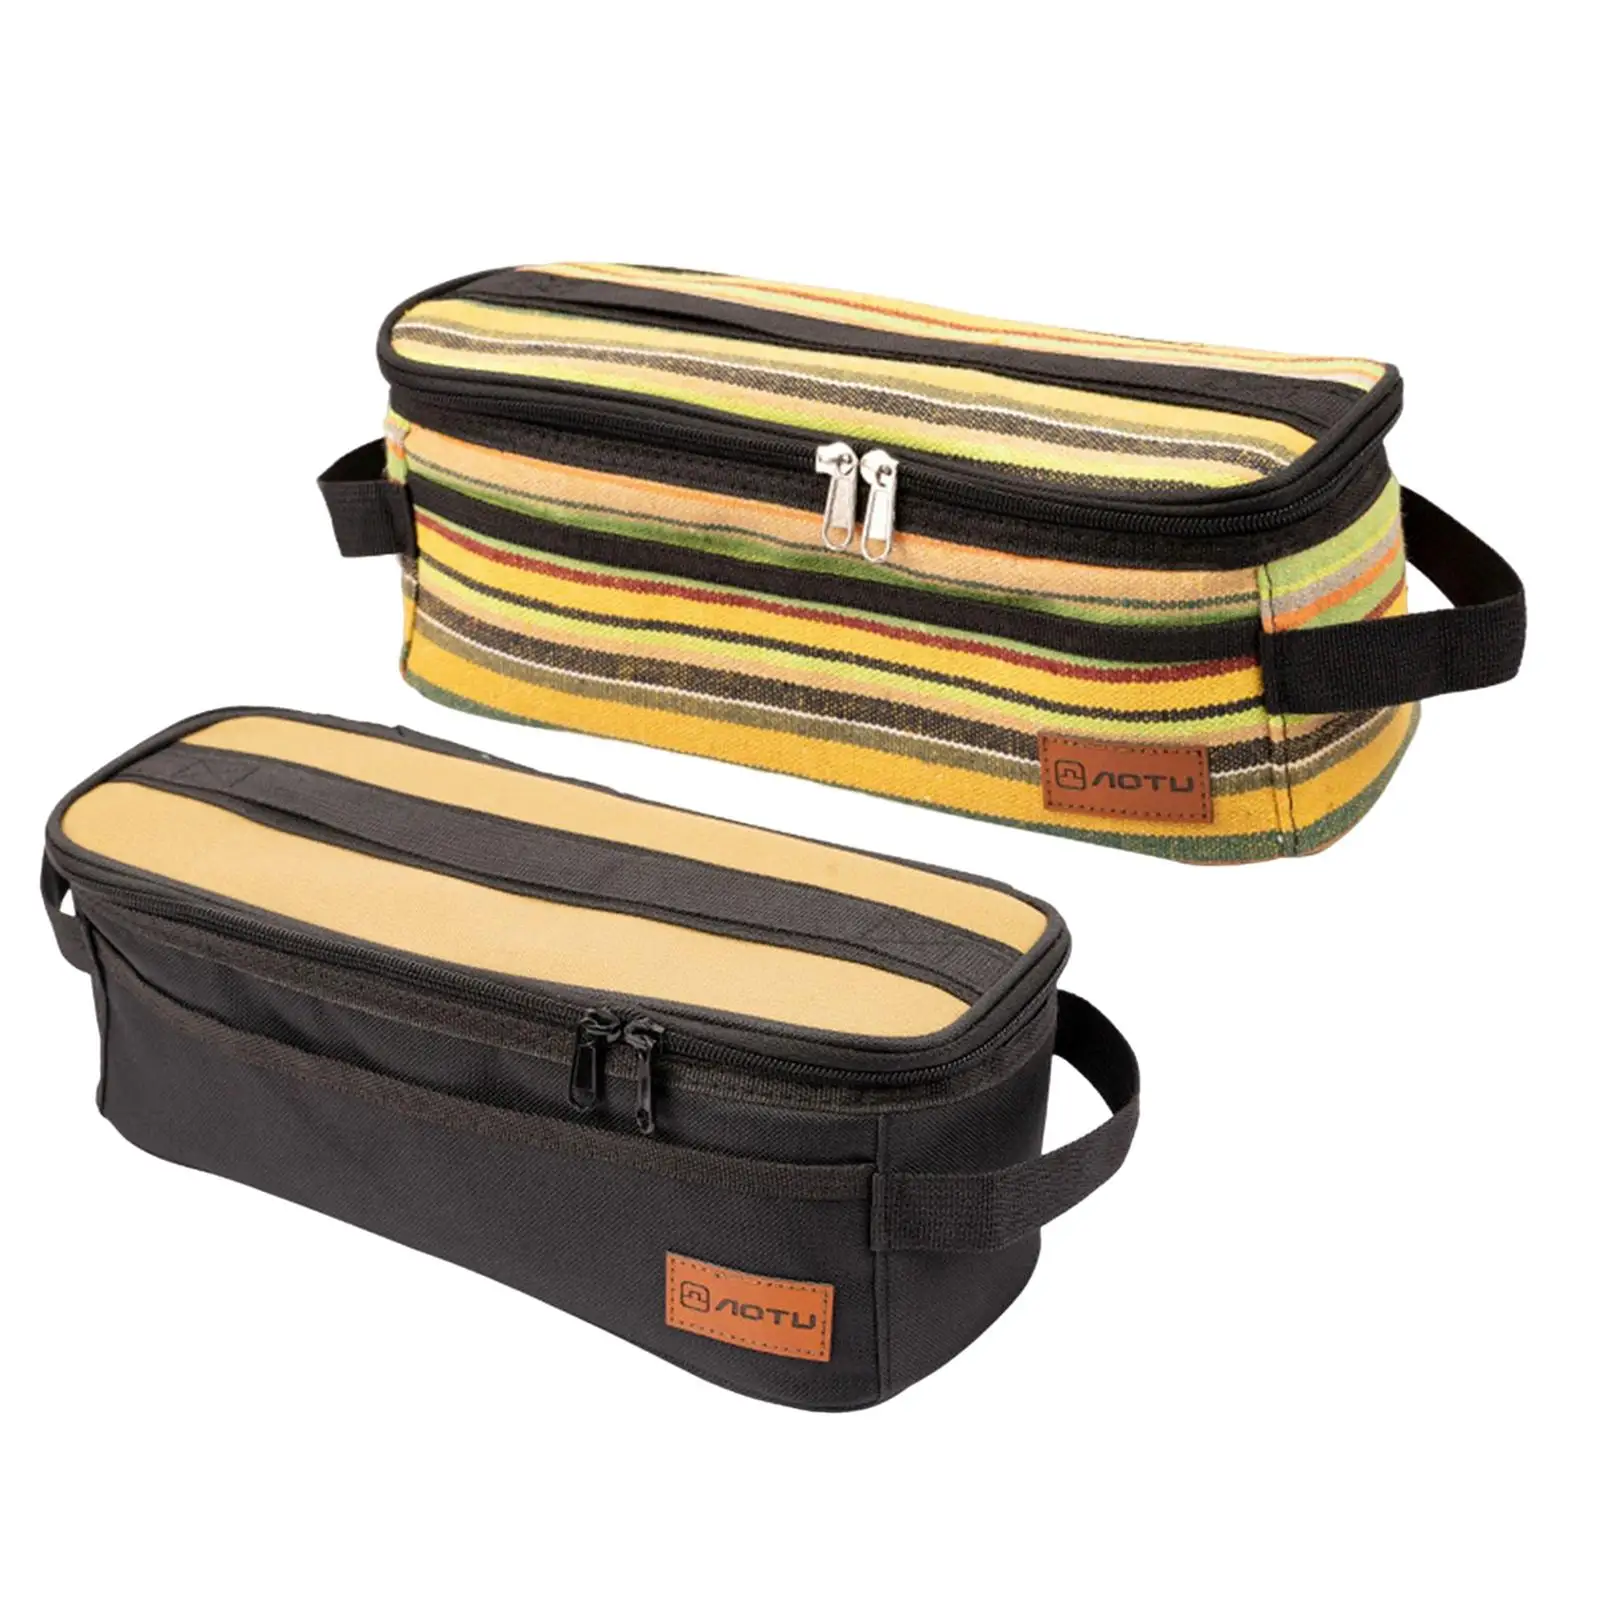 Outdoor BBQ Cookware Set - Durable and Stylish Barbecue Tool Bag